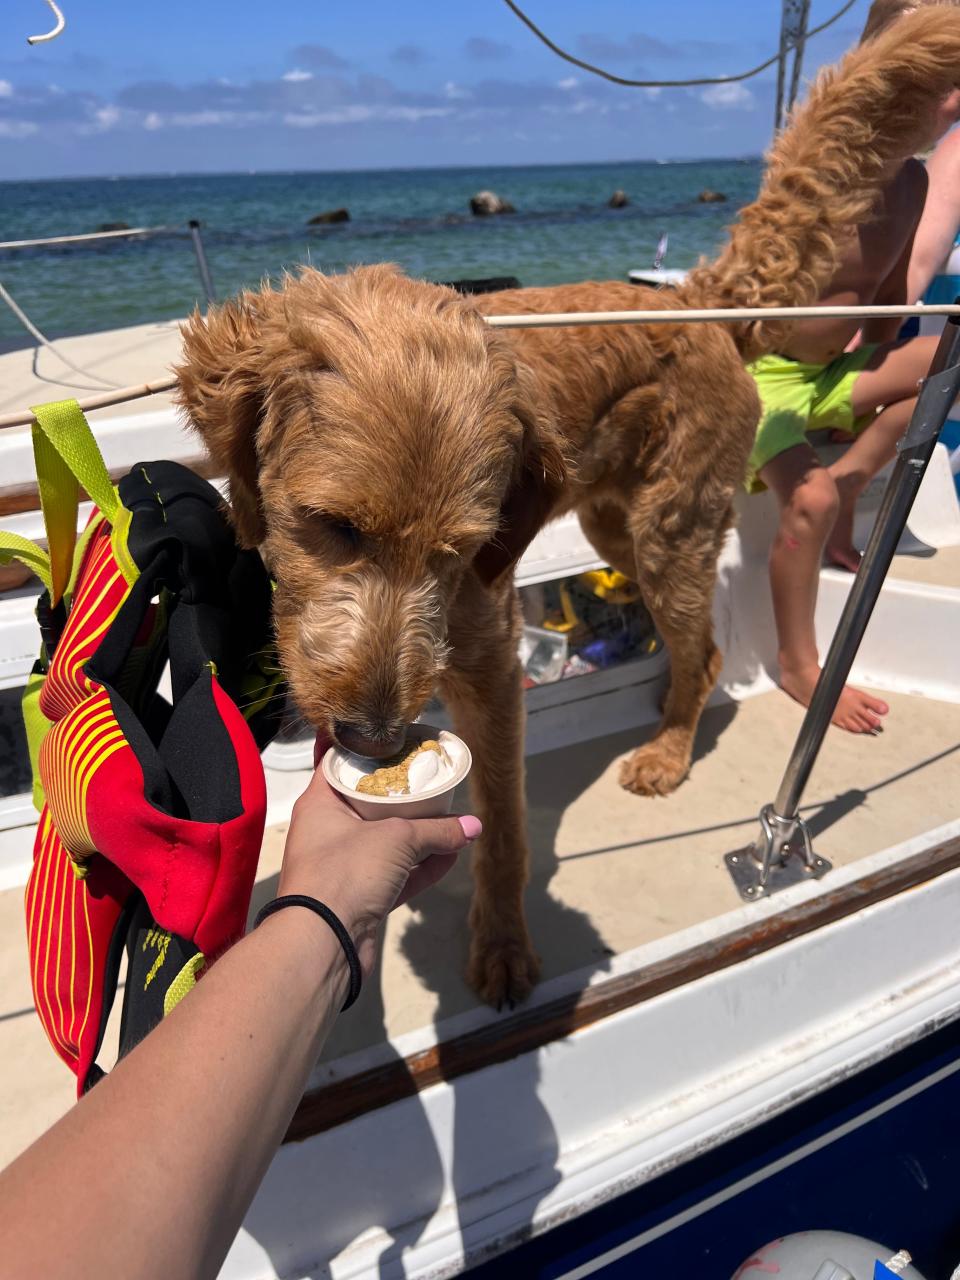 Fiona, with the Kirk family, is loving her pup cup in early July at West Falmouth Harbor.